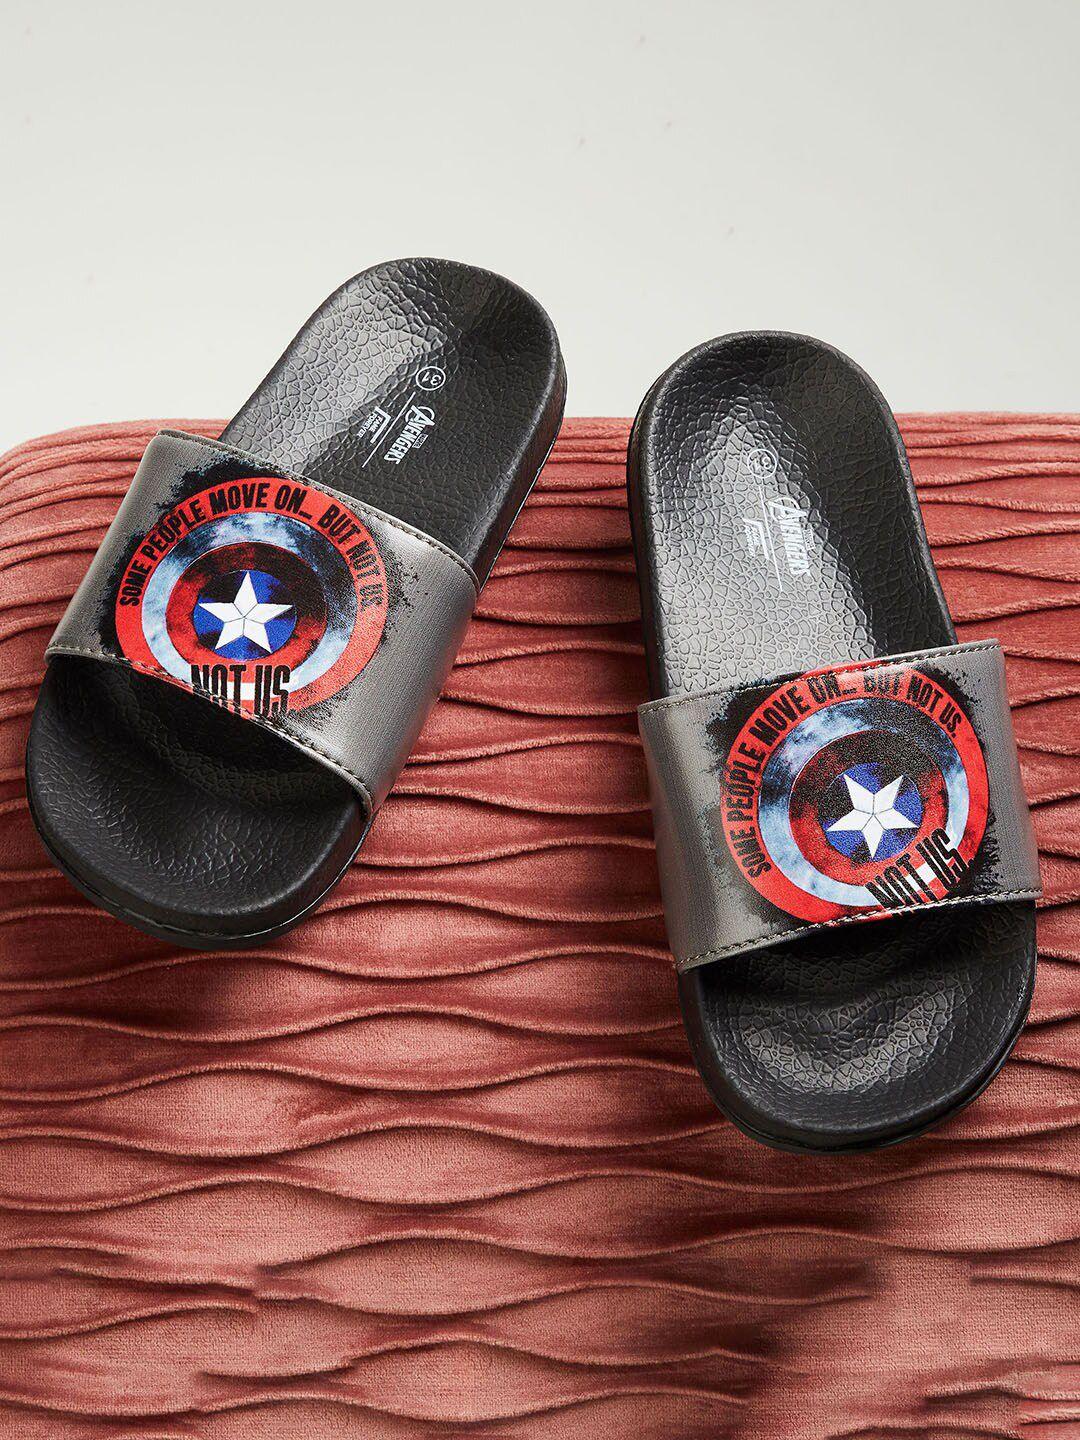 fame-forever-by-lifestyle-boys-black-&-red-printed-sliders